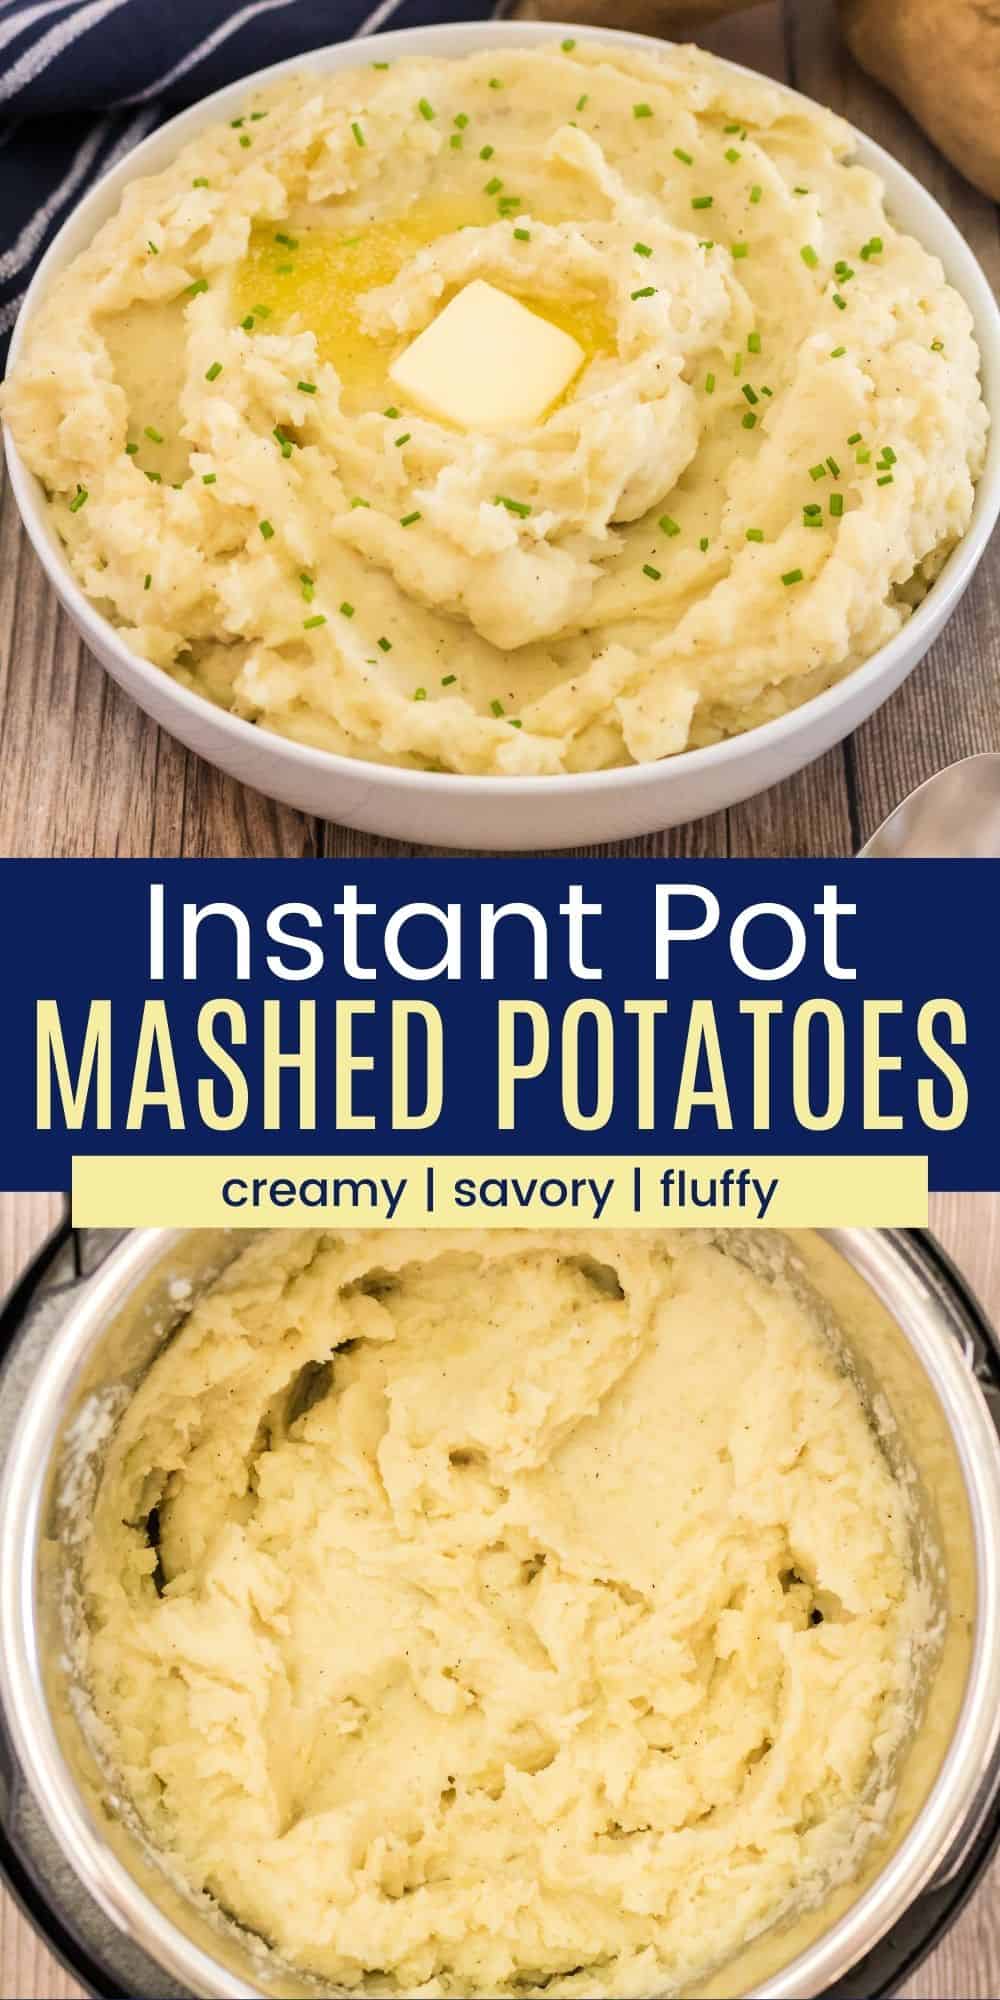 Instant Pot Mashed Potatoes | Cupcakes & Kale Chips